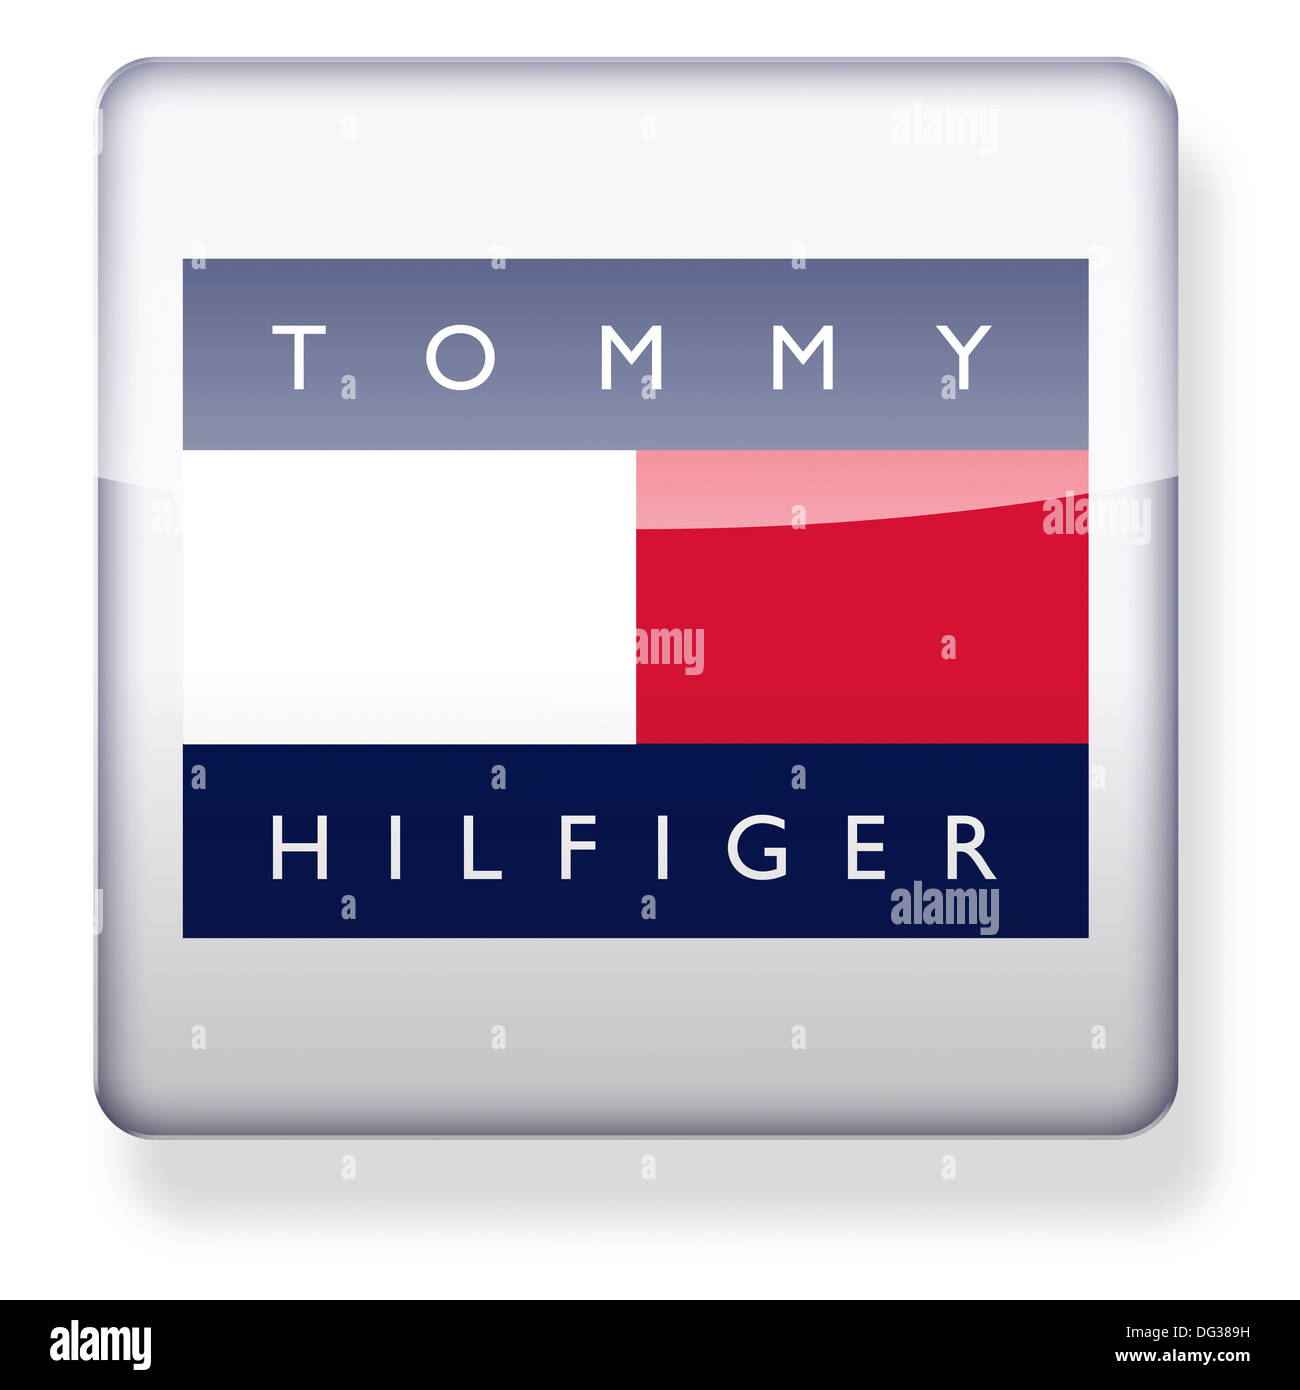 Tommy HIlfiger logo as an app icon. Clipping path included Stock Photo -  Alamy